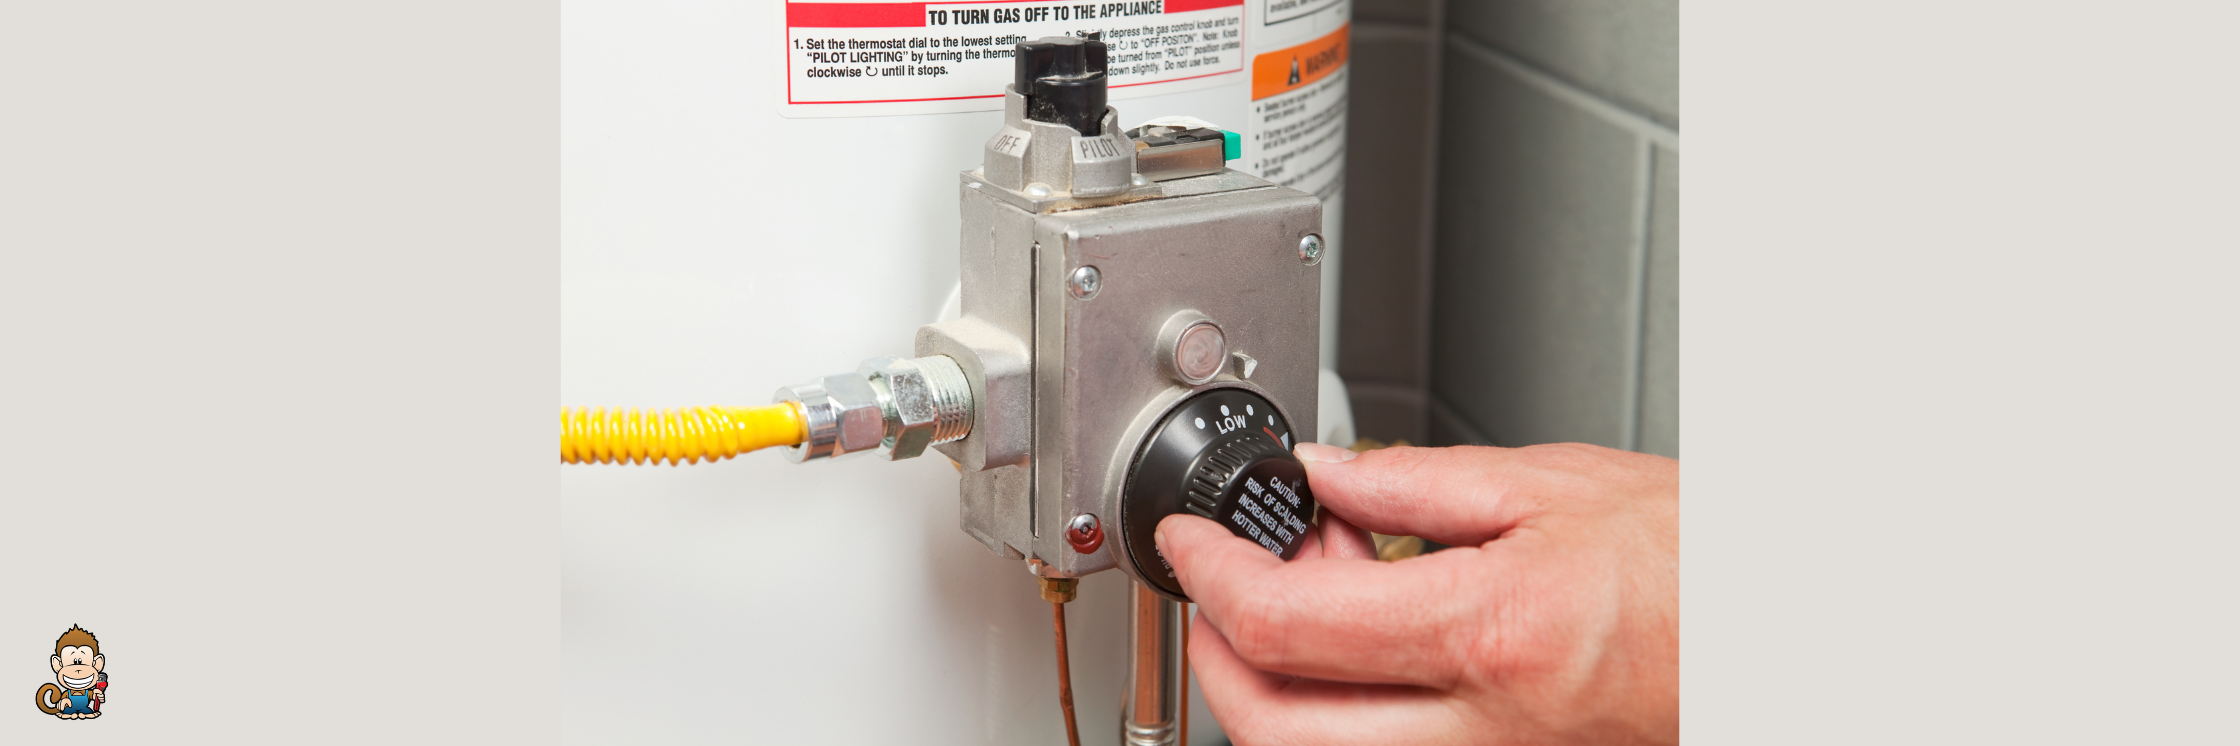 How to Relight a Pilot Light on a Water Heater Video